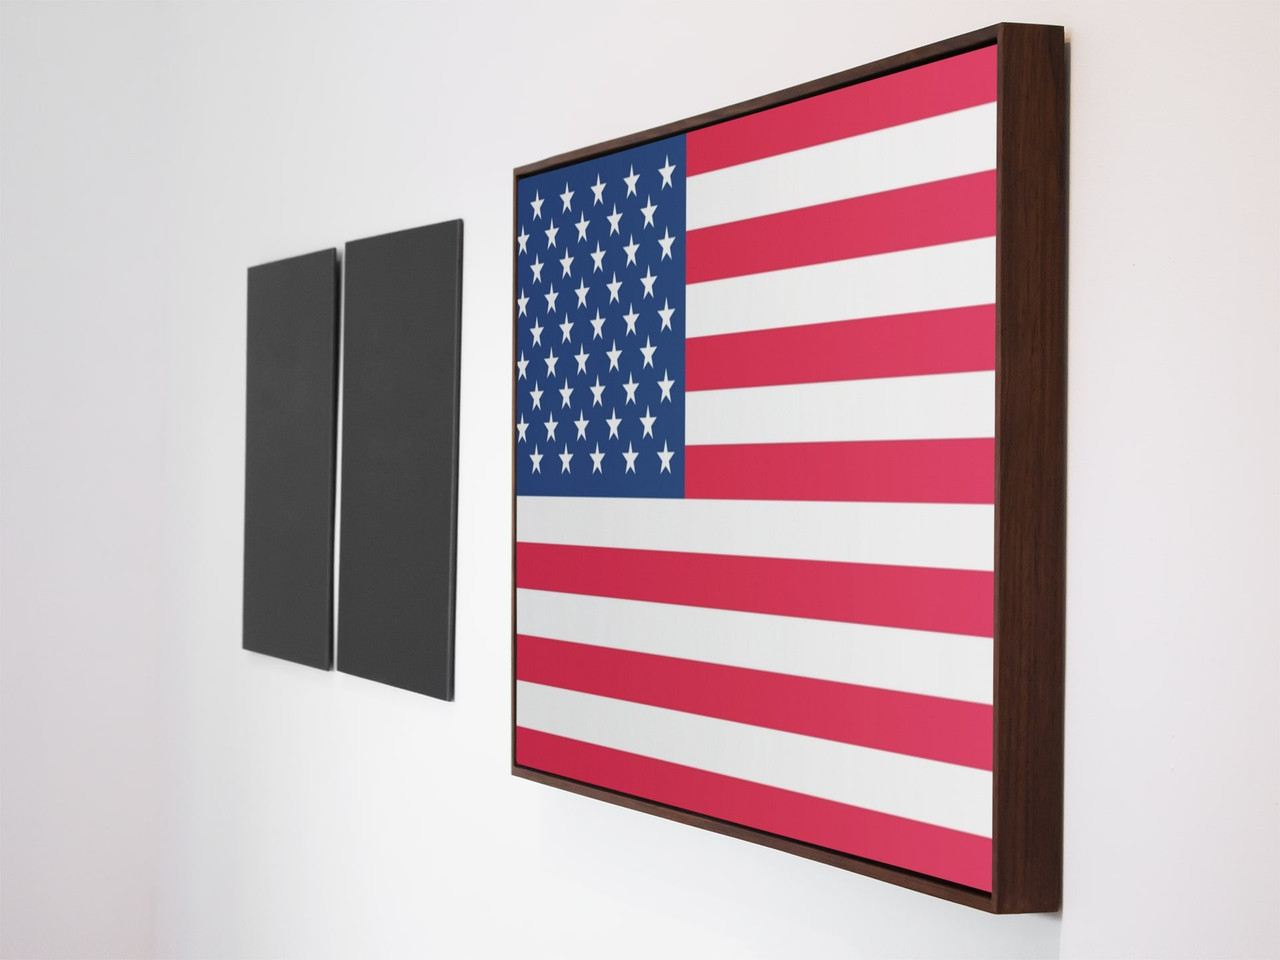 US American 18x12 Wall Wall Cool Print Art Classy Decor Cool Photograph Print - State United Picture Art Print Flag Poster Room American Decor Home States Graphic Flag Poster Canvas Aesthetic Modern